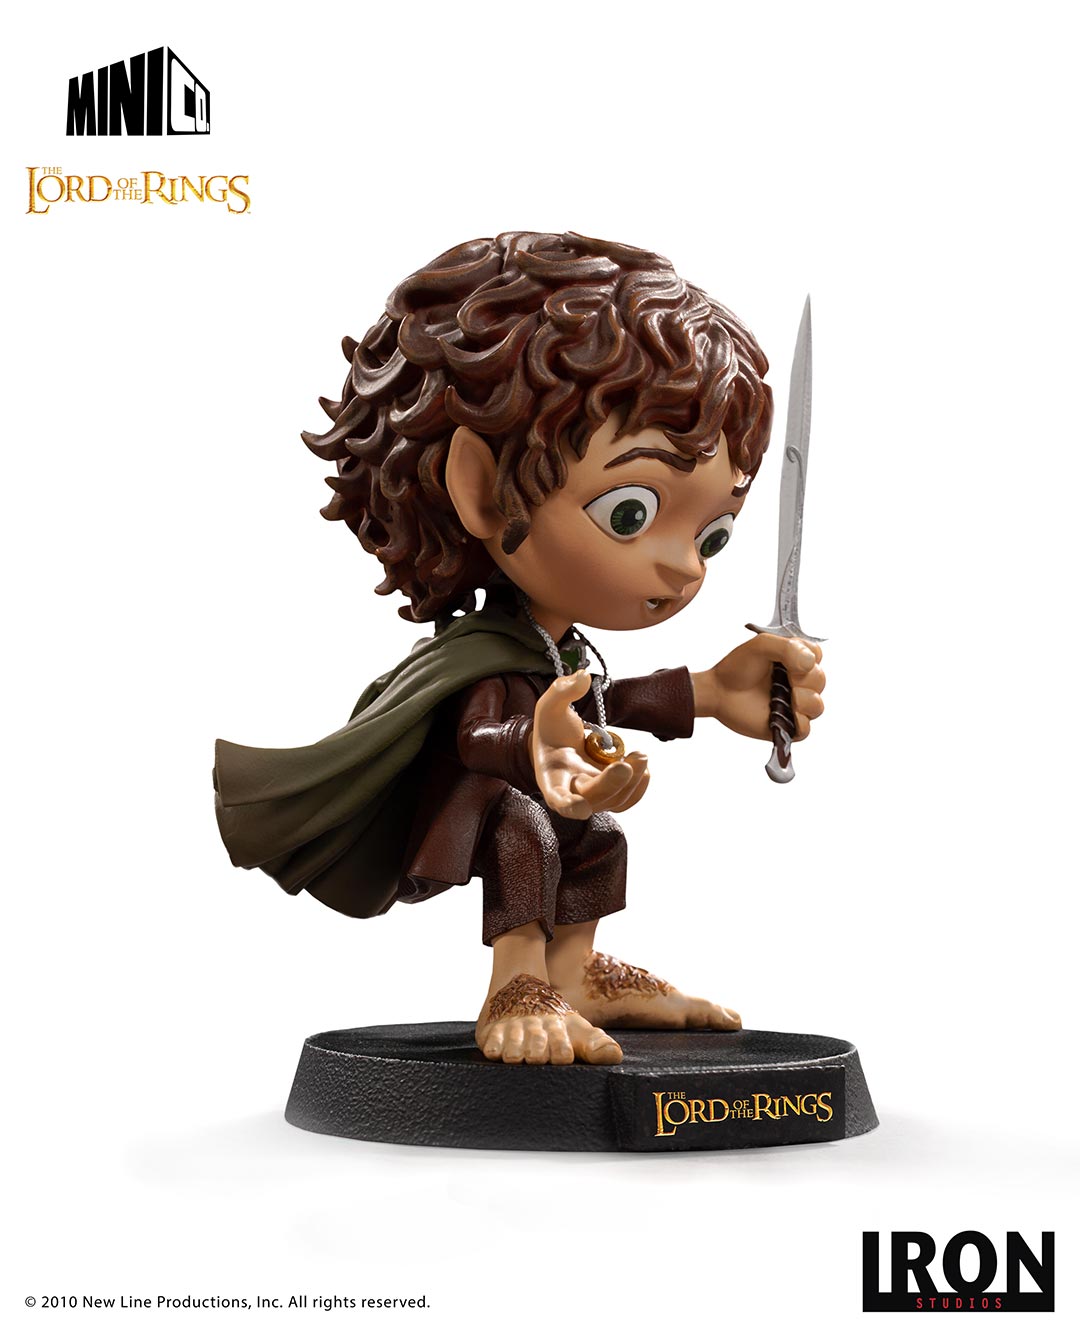 Iron Studios - Minico - The Lord of the Rings - Frodo